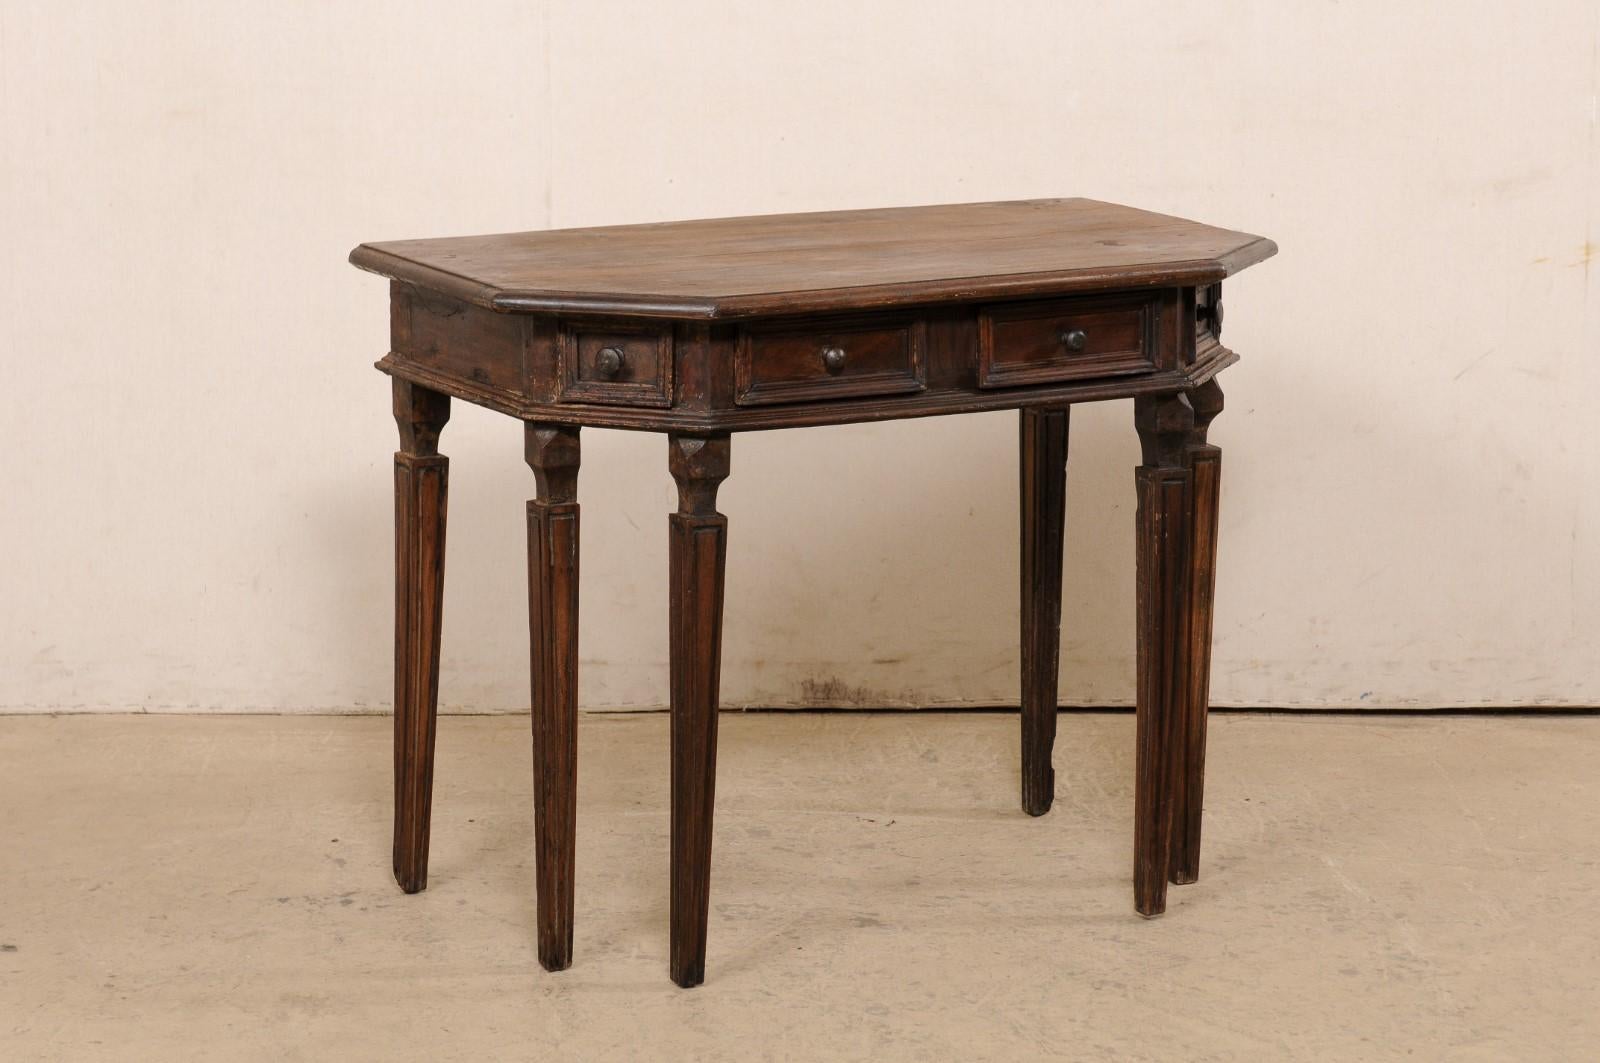 An Italian carved walnut demi console with drawers from the 18th century. This antique table from Italy has a halved-octagon shaped top (comprised of a single board) which slightly overhangs the apron below that houses a pair of small recessed-panel